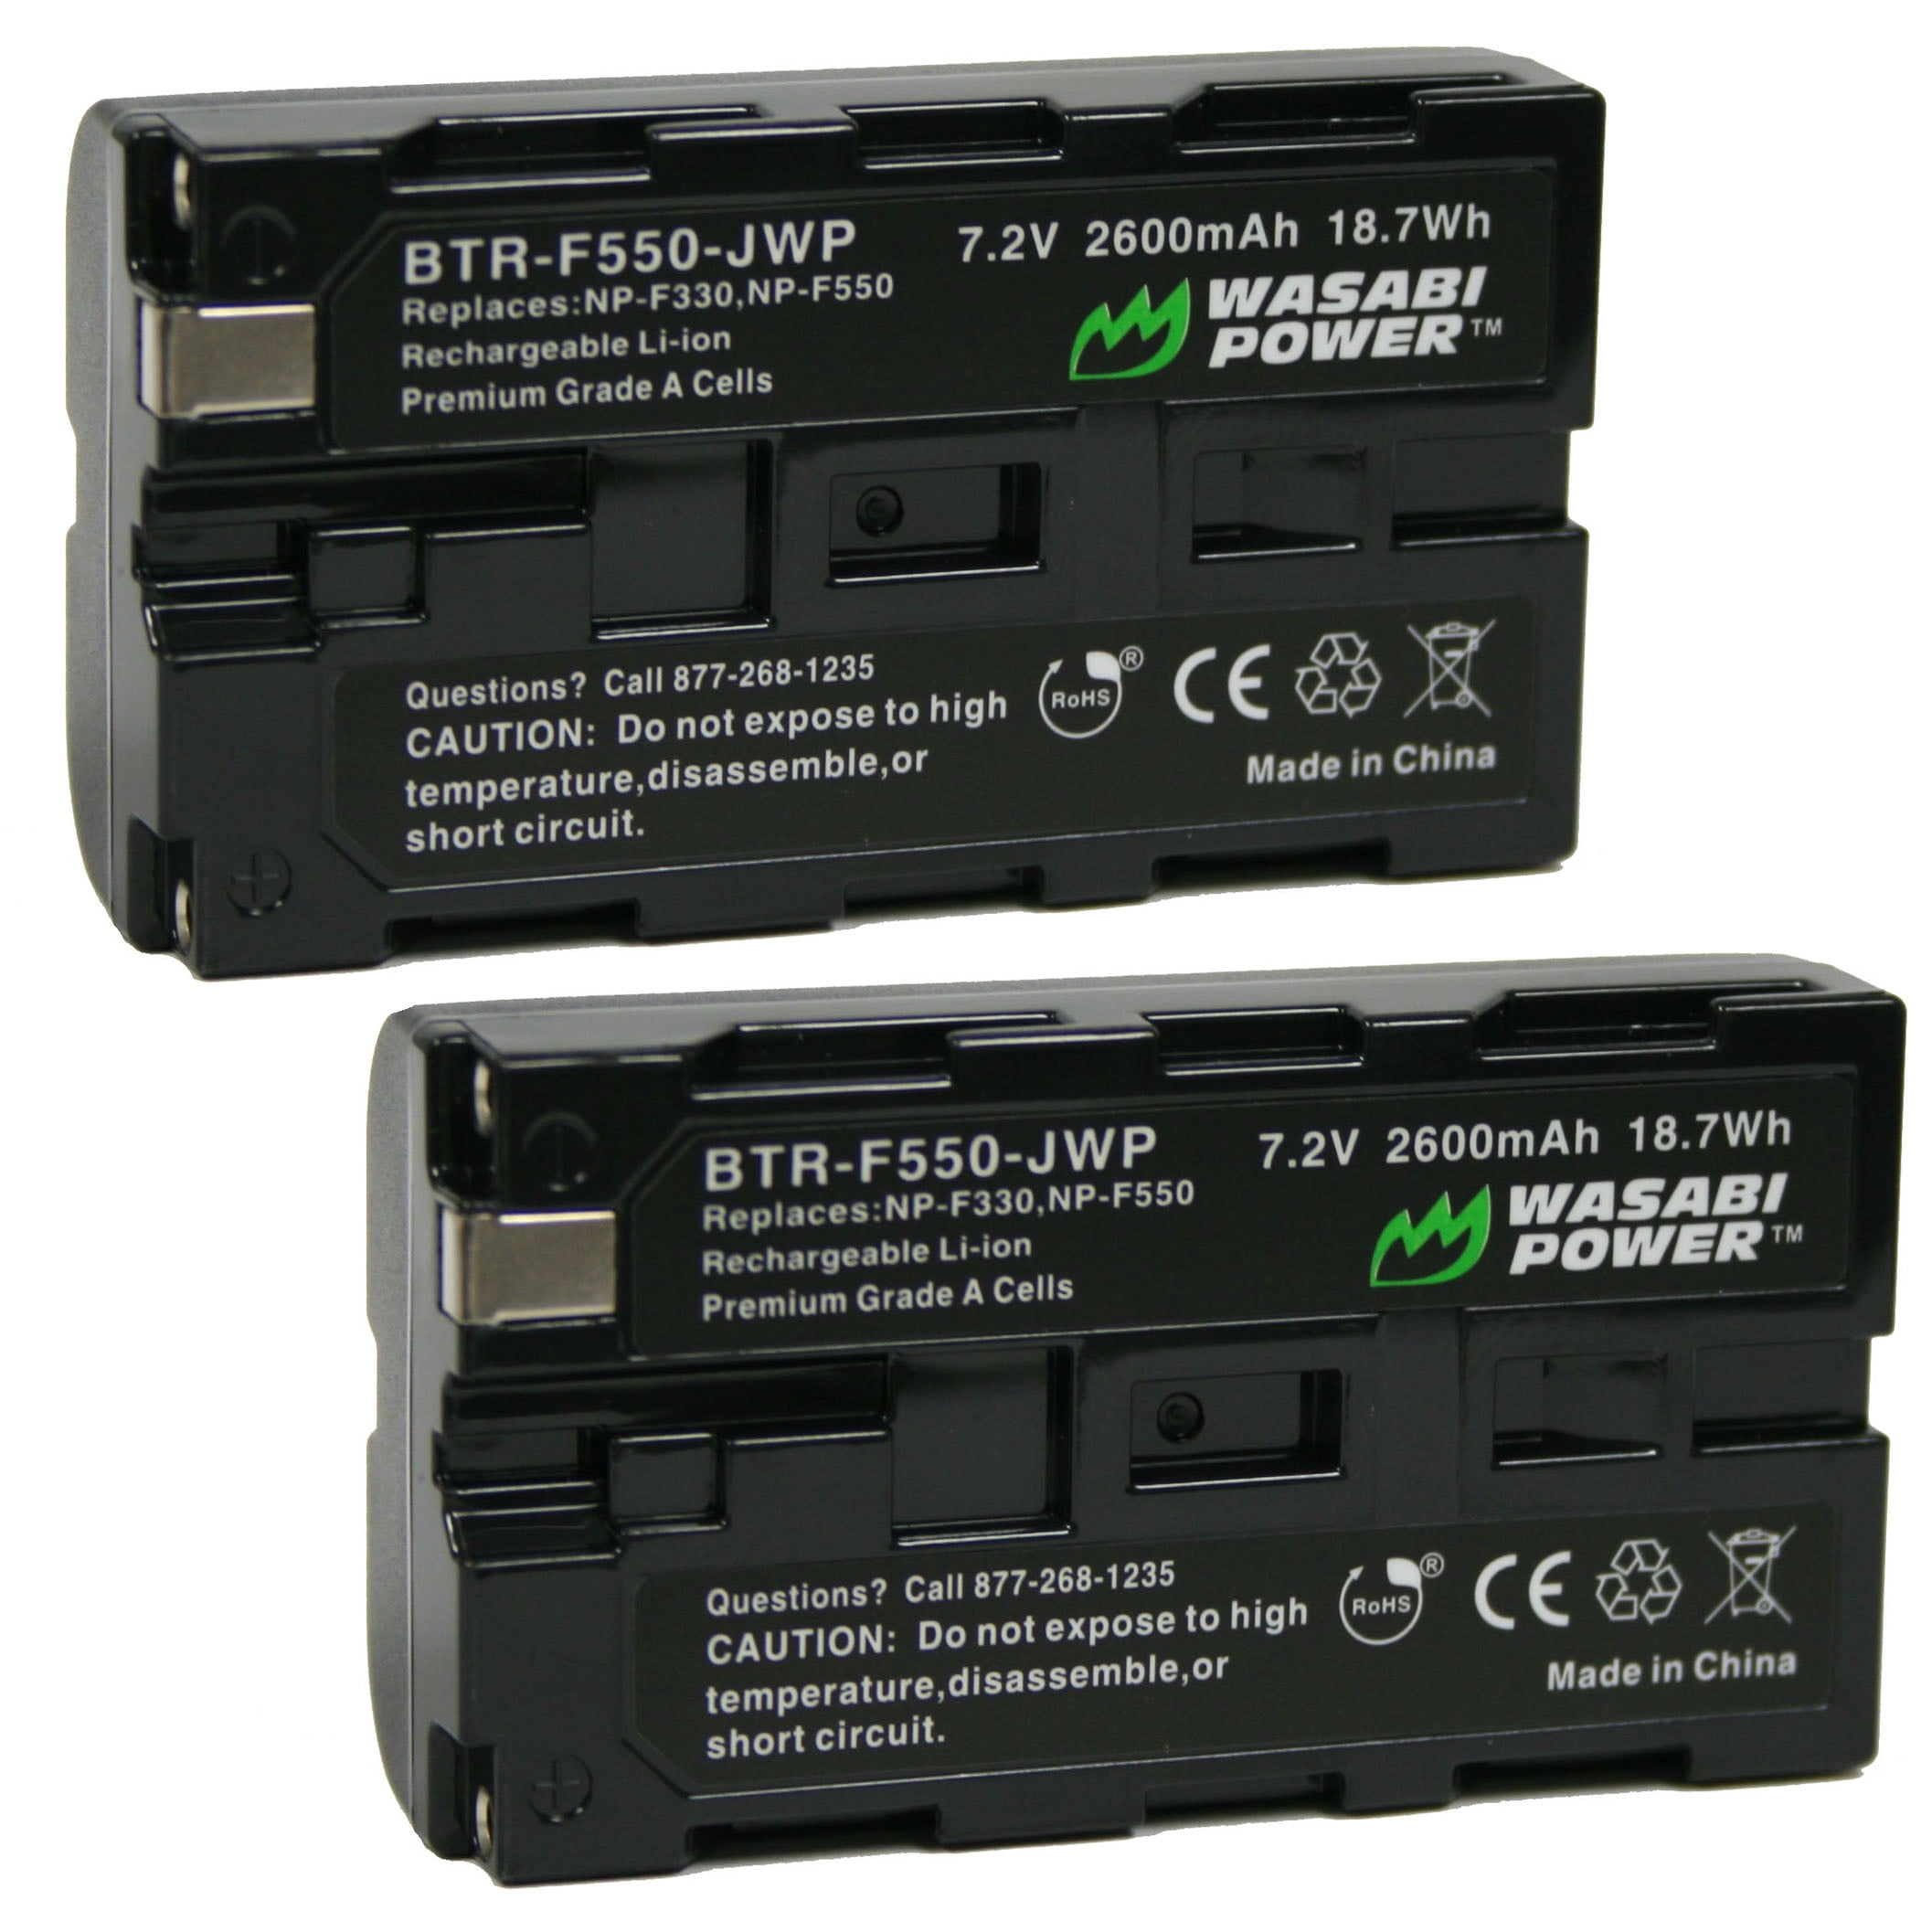 Replacement for Sony NP-F330 Battery Compatible with Sony NP-F550 Digital Camera Battery 2200mAh 7.2V Lithium-Ion 